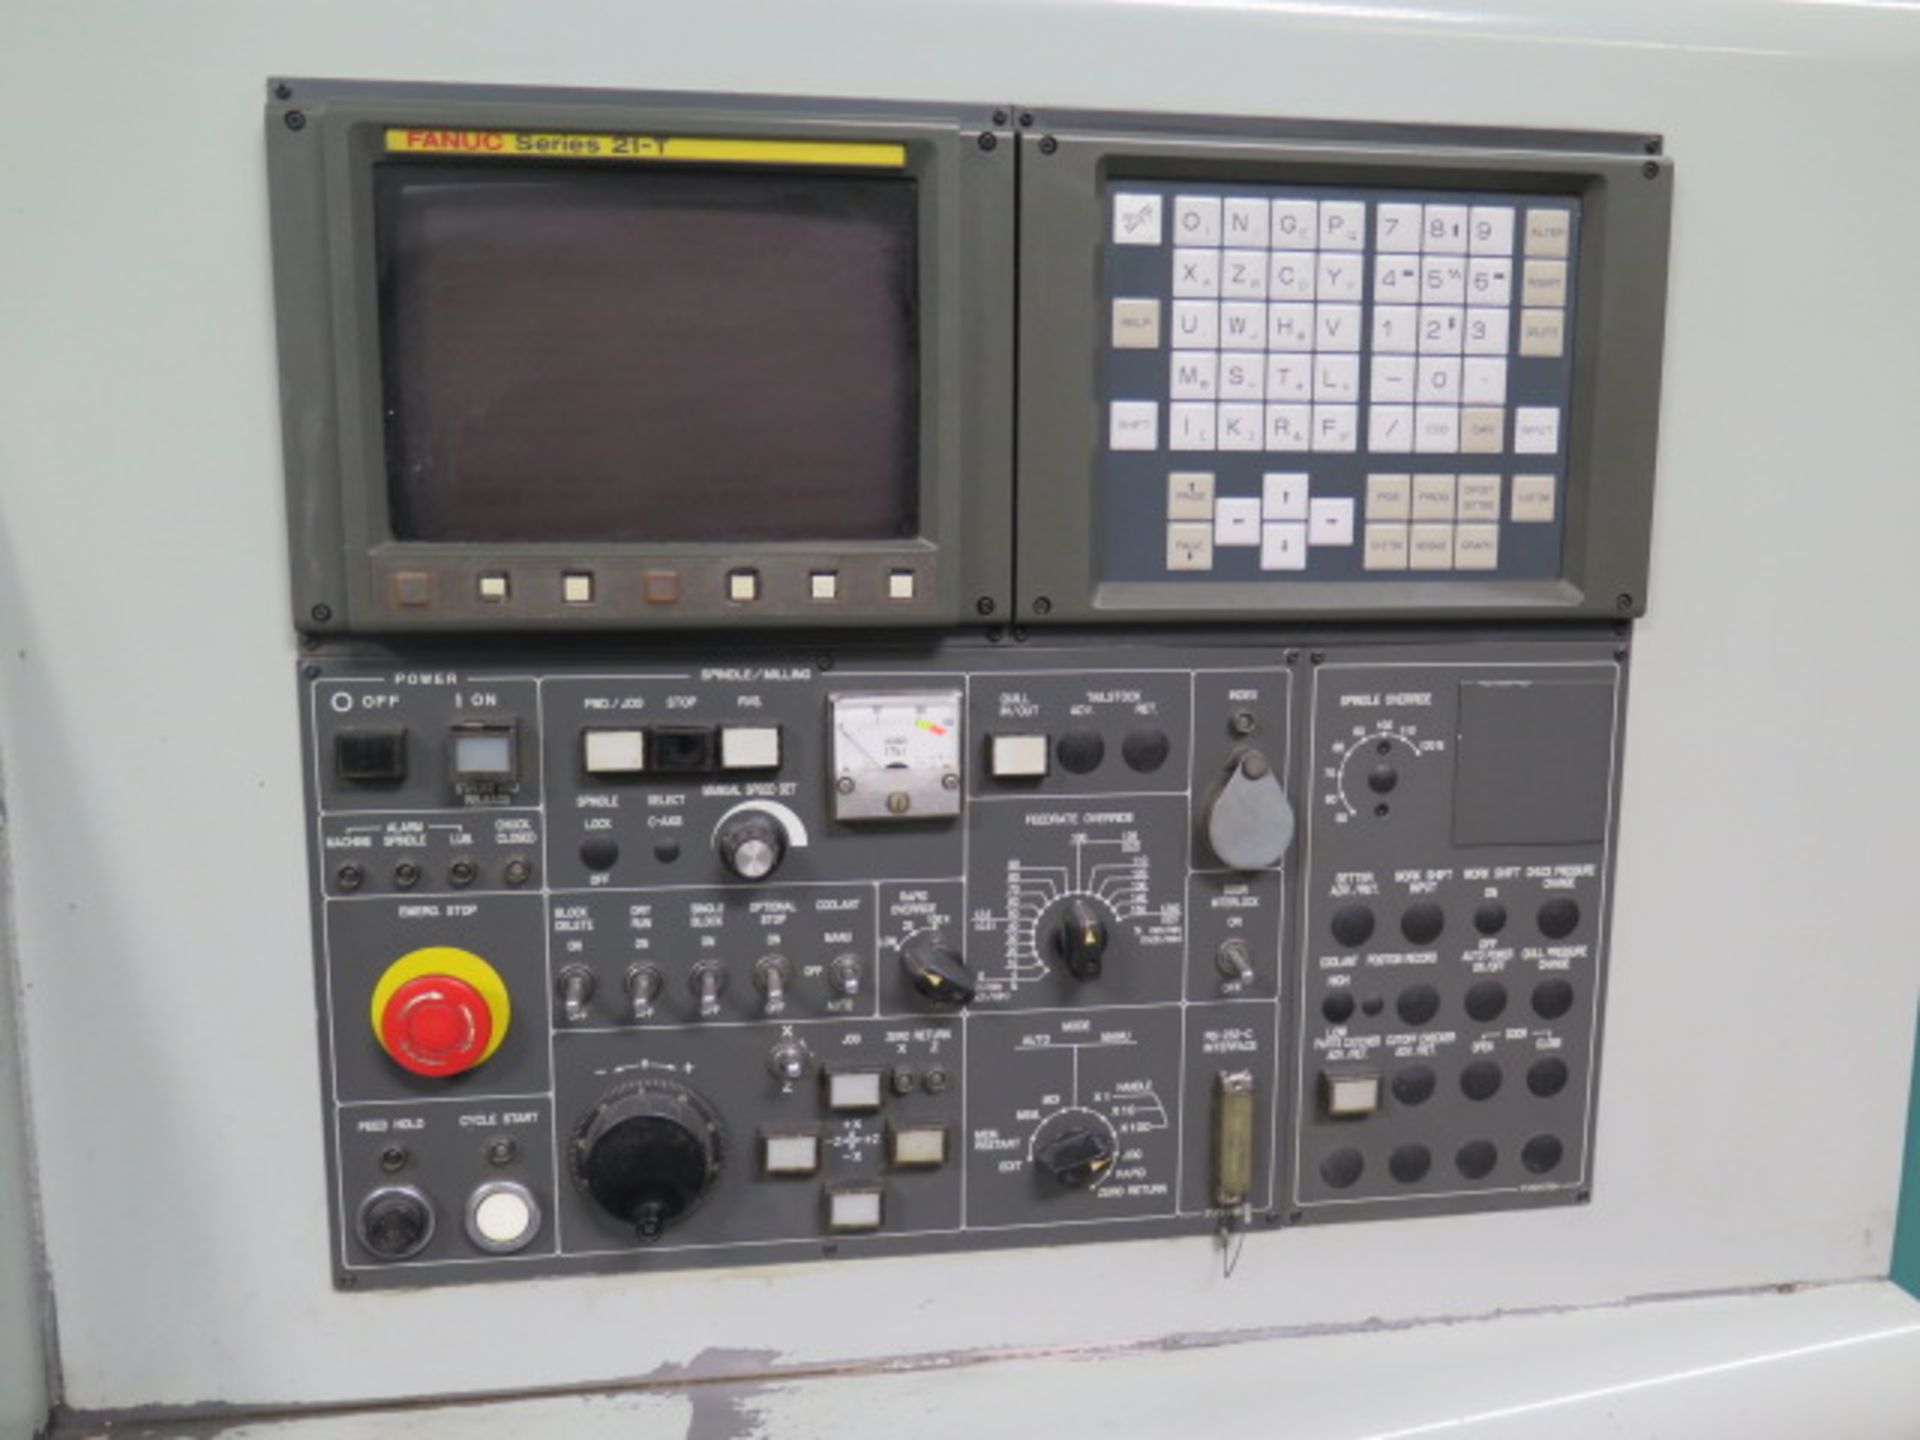 Nakamura-Tome SC-300 CNC Turning Center s/n S303902 w/ Fanuc Series 21-T Controls, SOLD AS IS - Image 5 of 20